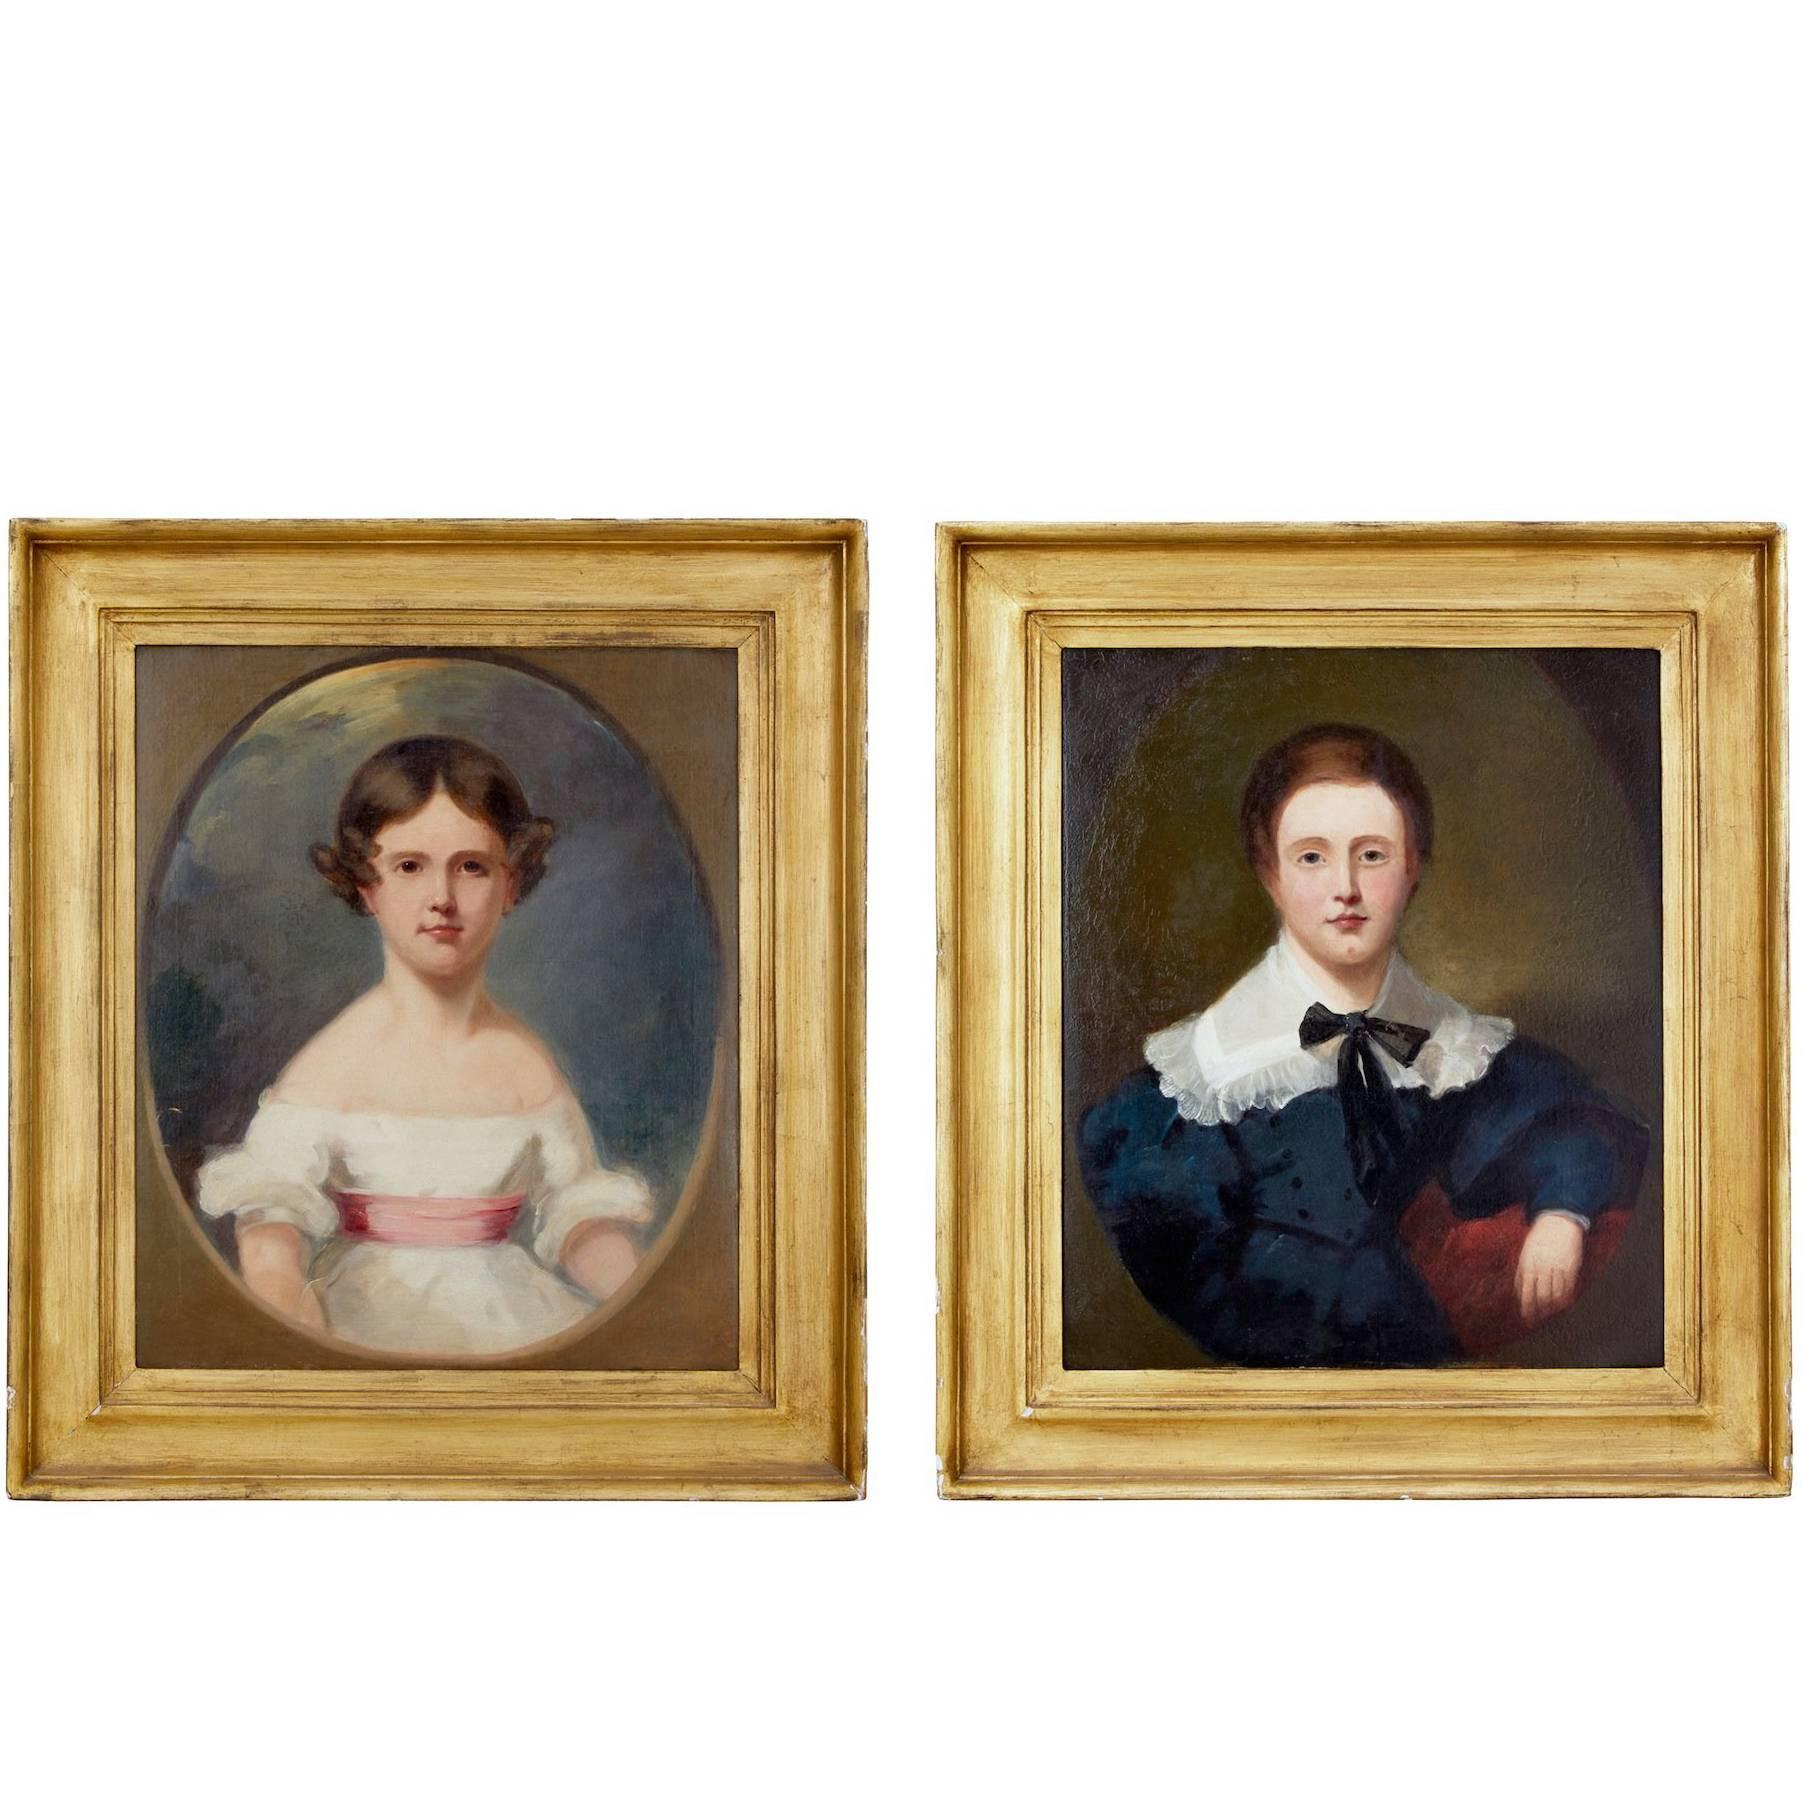 Pair of Early 19th Century Oil on Canvas Regency Child Portraits